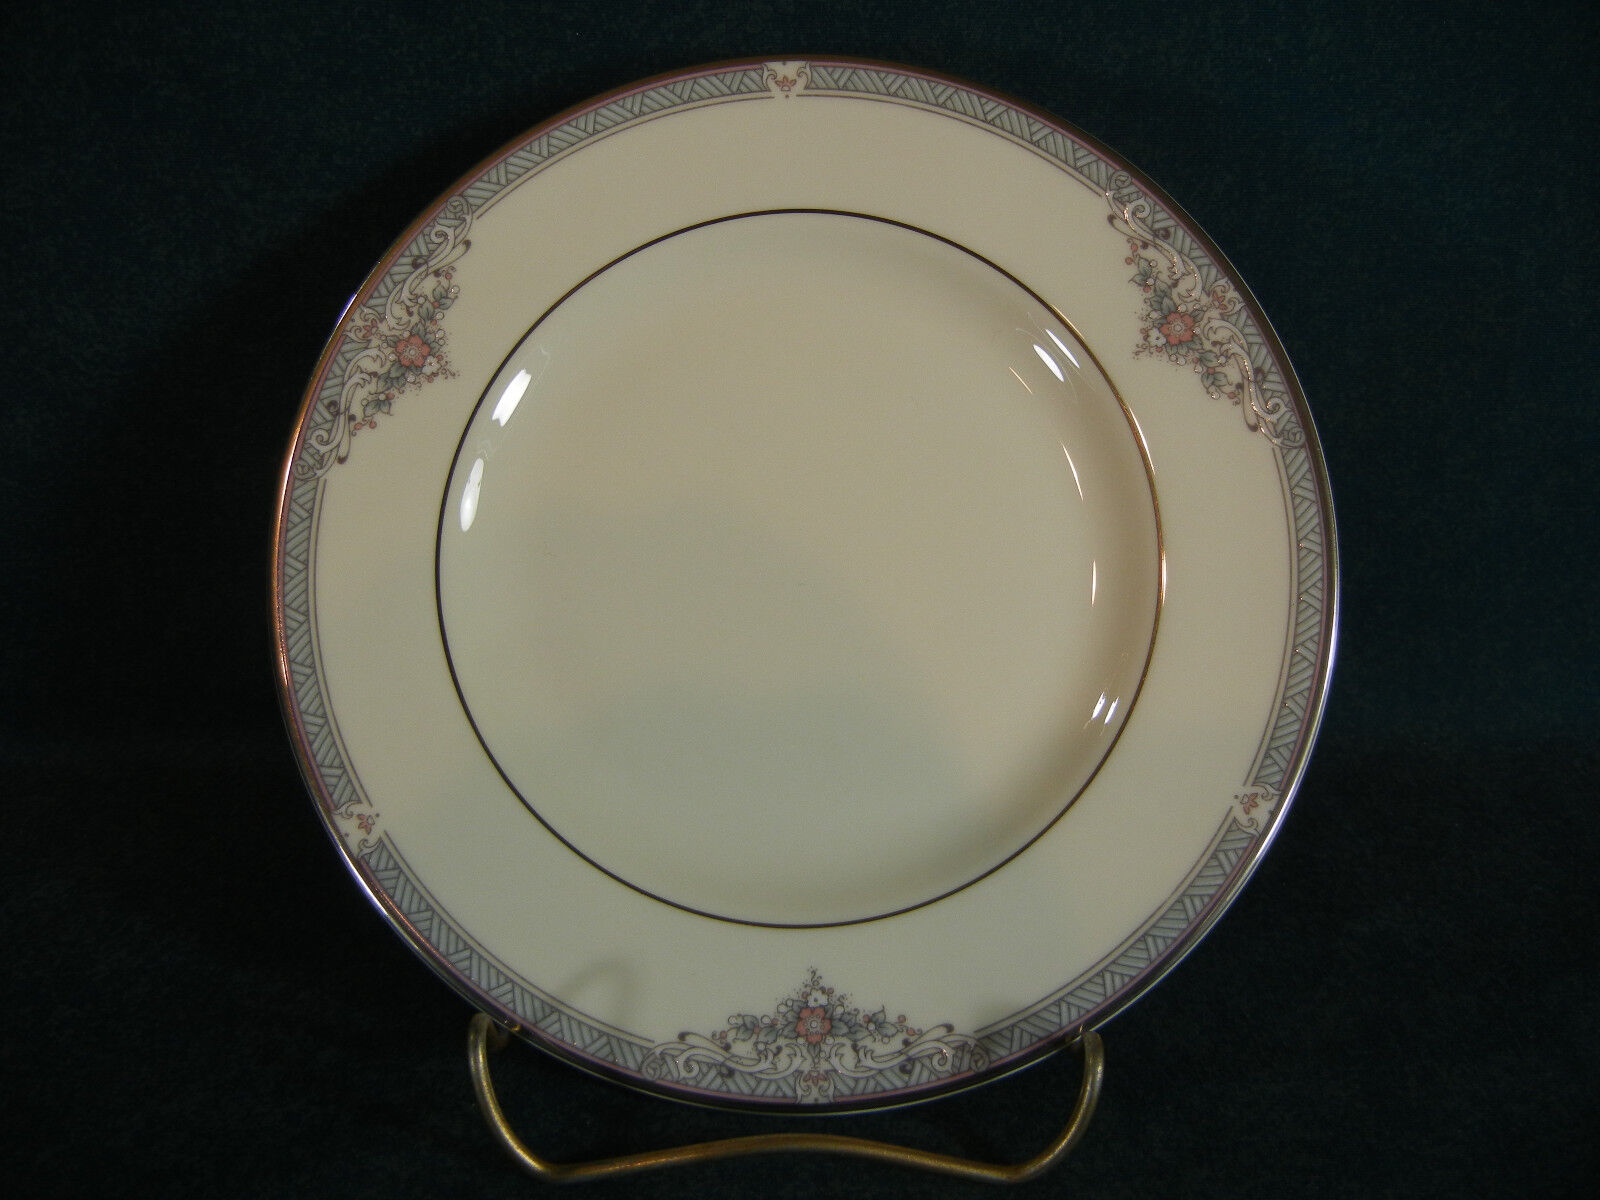 Royal Doulton Jillian H5193 Bread and Butter Plate(s)